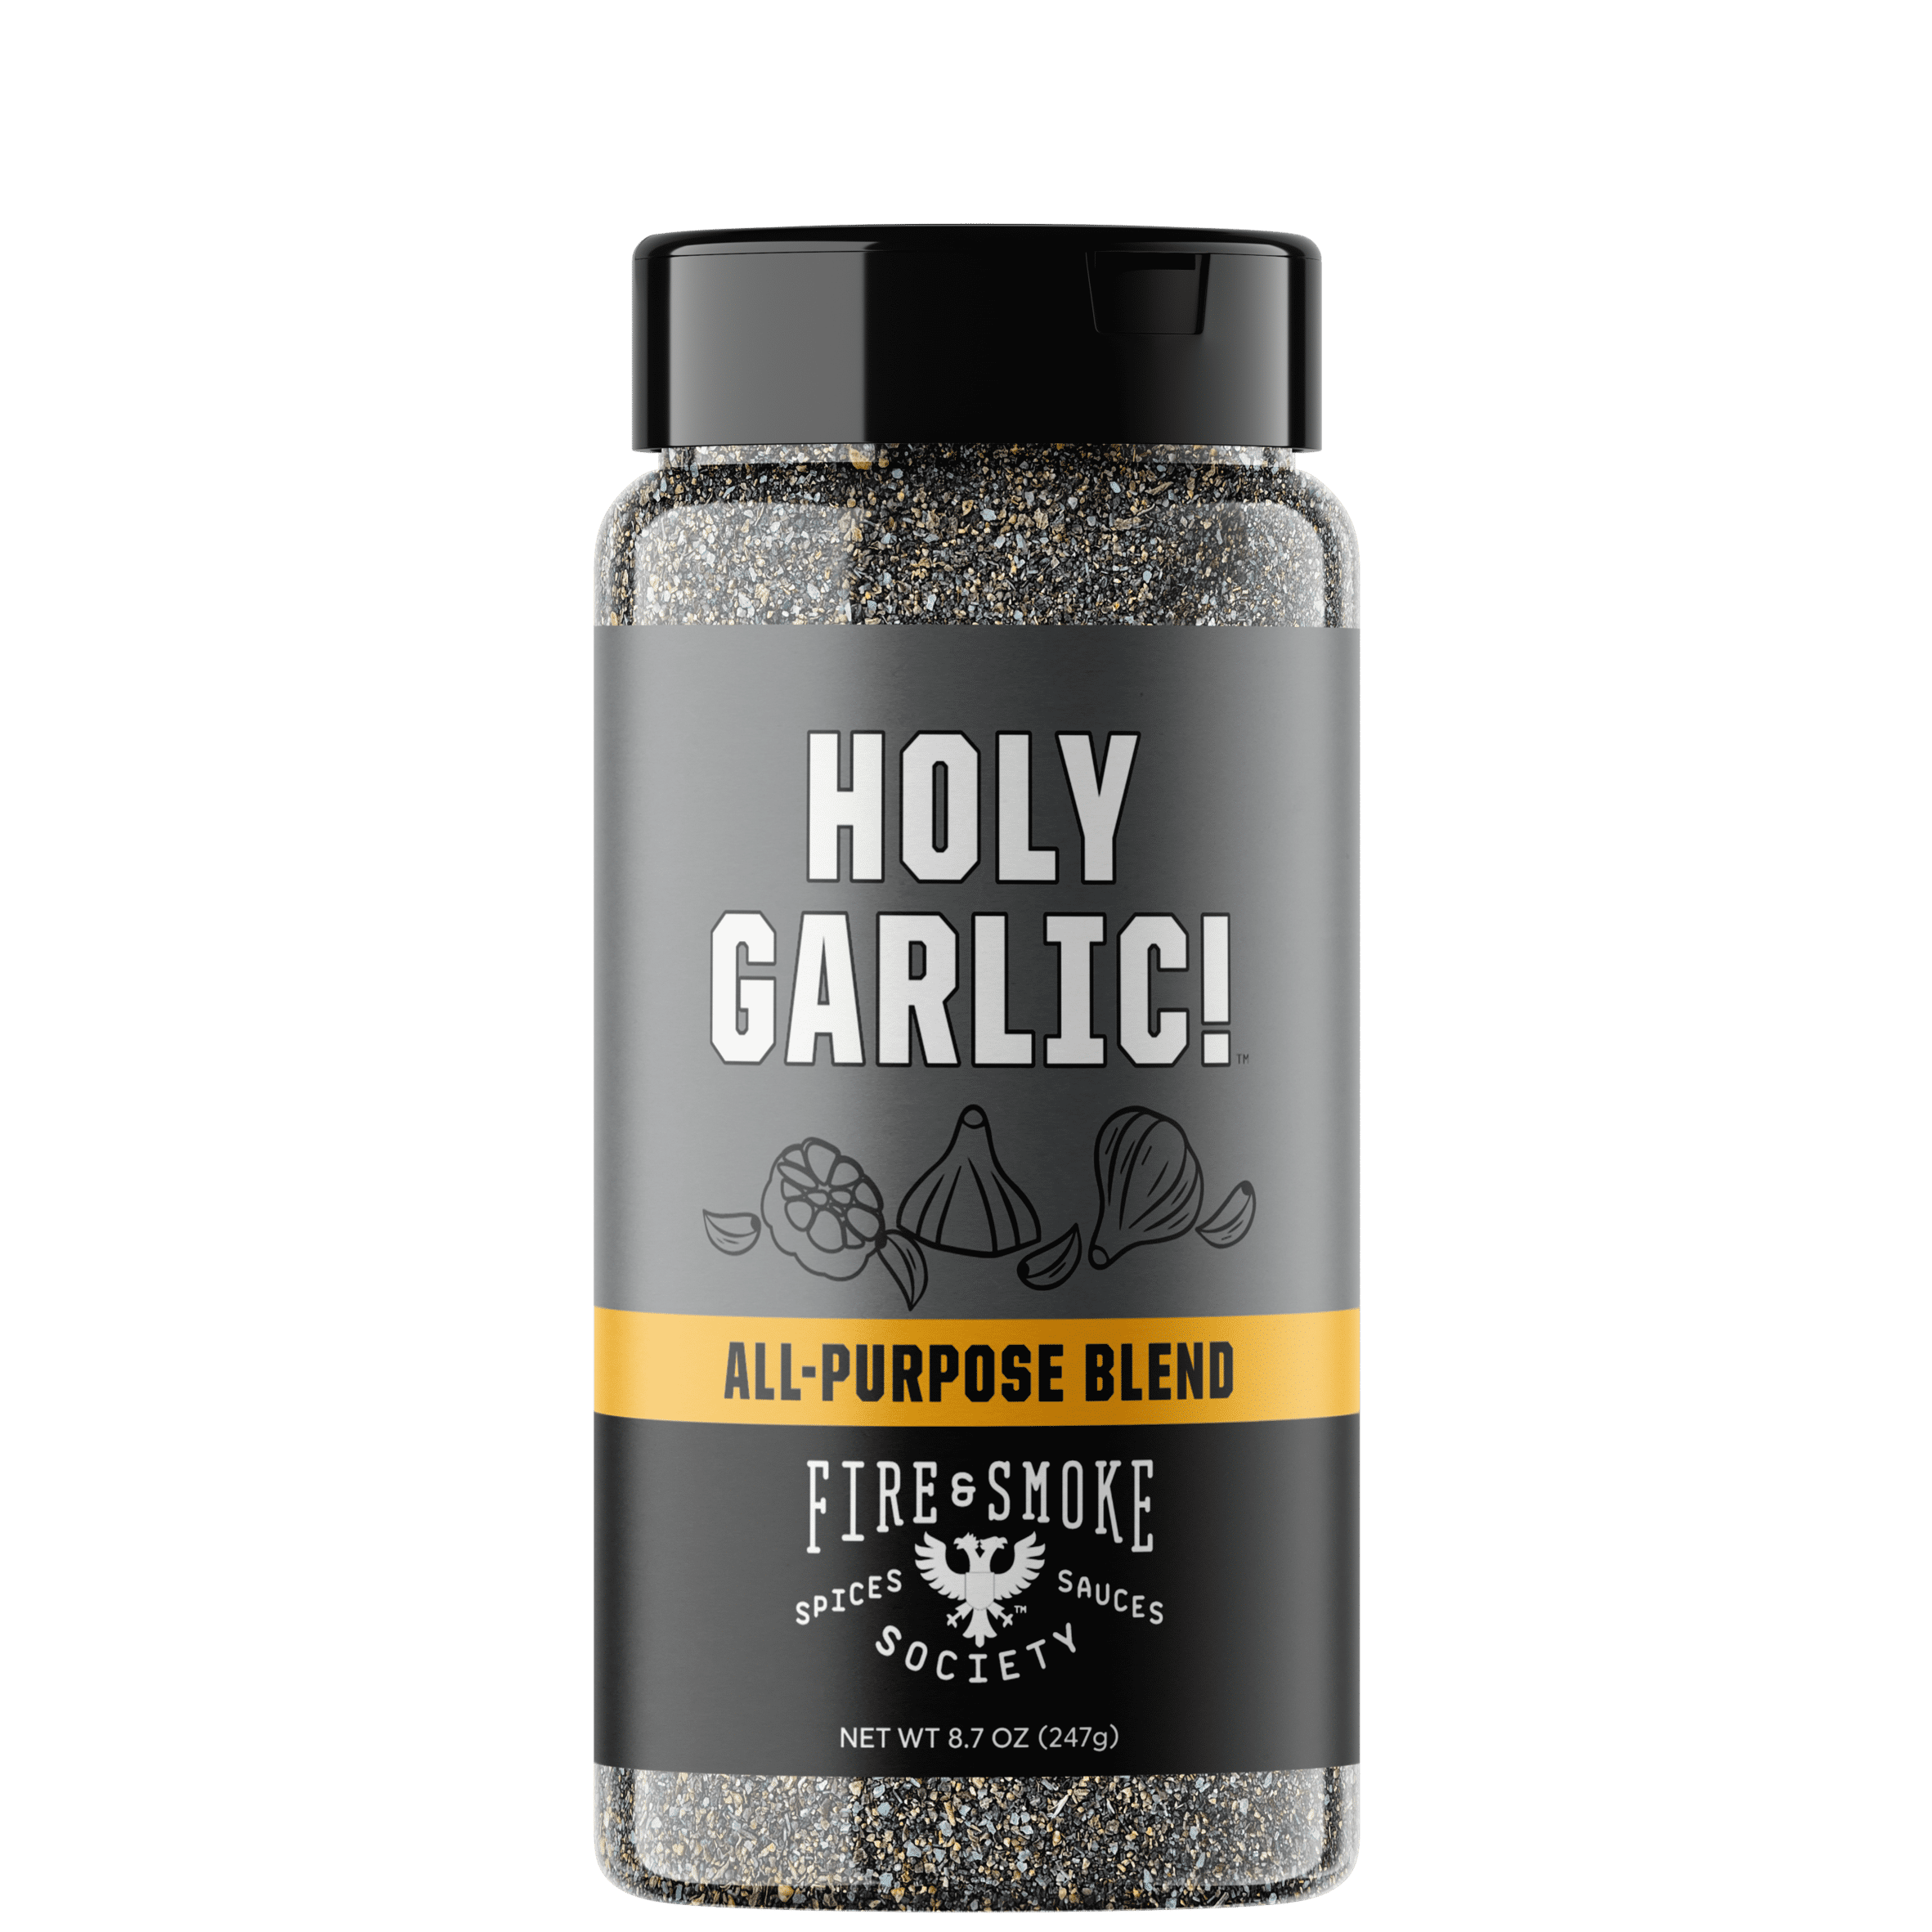 Fire & Smoke Society Holy Garlic Grill Series Spice Blend, 8.2 ounce